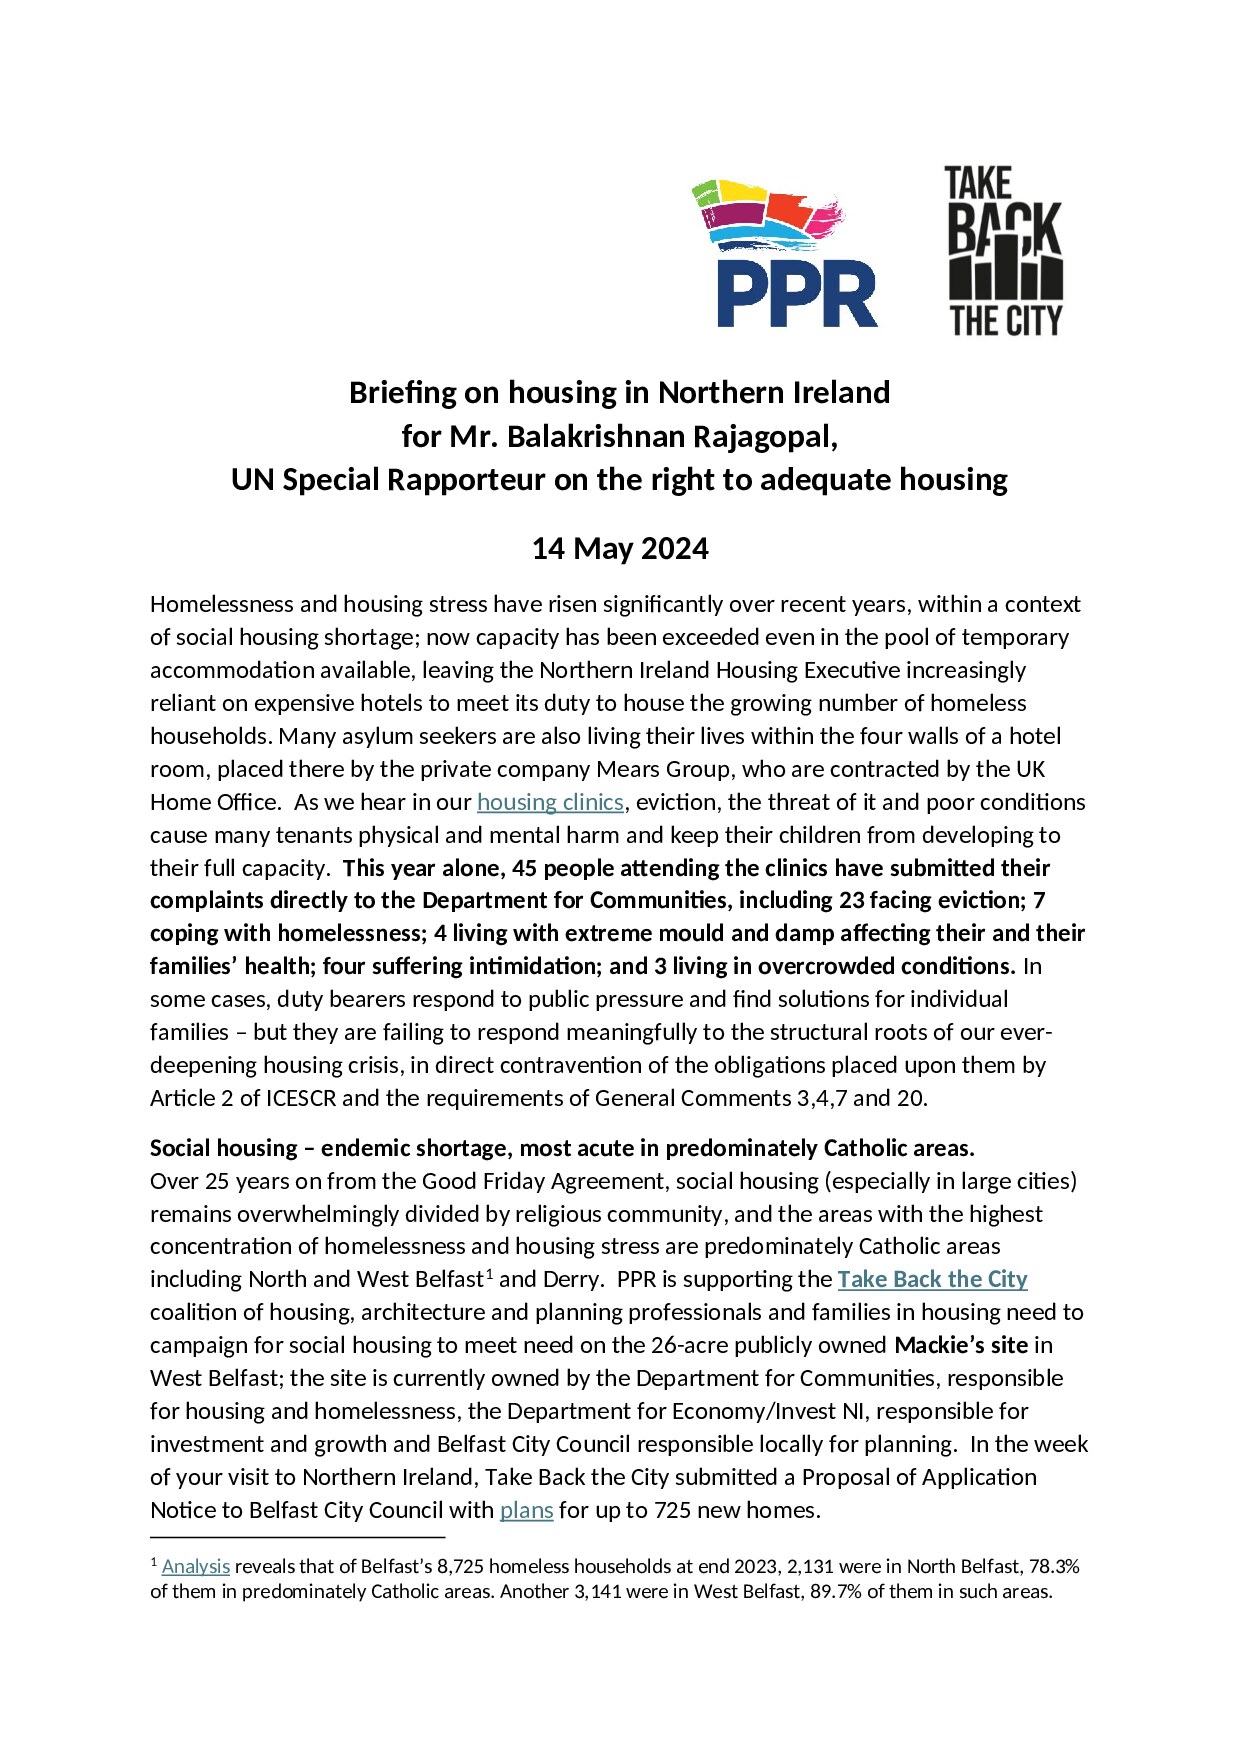 Briefing on housing in Northern Ireland  for Mr. Balakrishnan Rajagopal, UN Special Rapporteur on the right to adequate housing